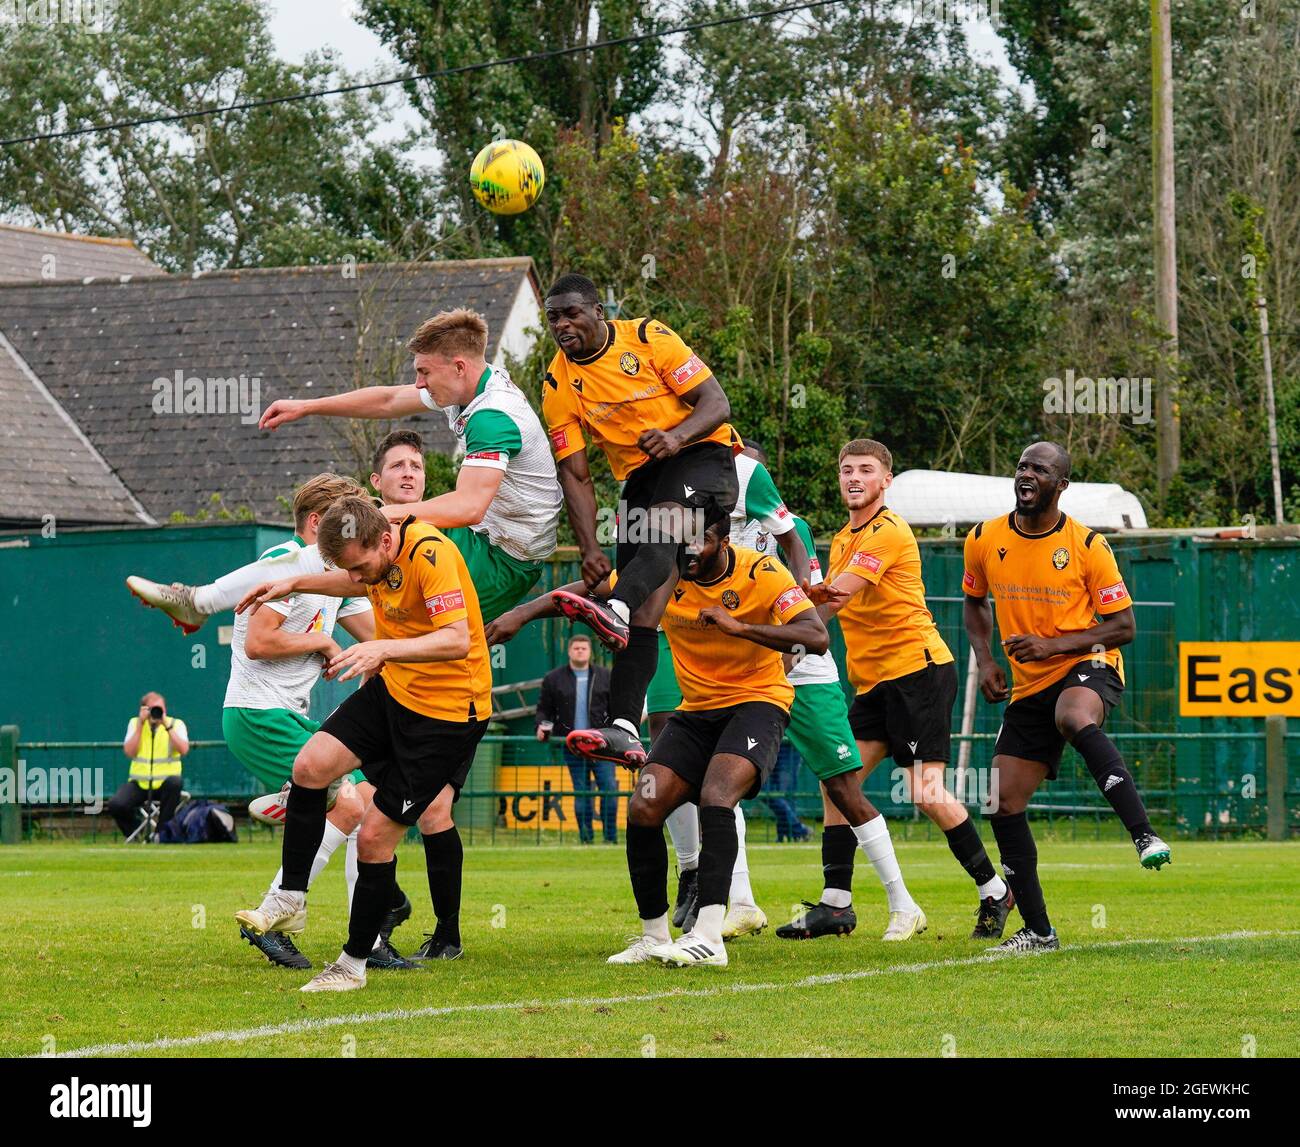 Isthmian Premier League soccer match, Bognor Regis Town Football Club versus East Thurrock. A bunch of players leap into the air to head the ball Stock Photo